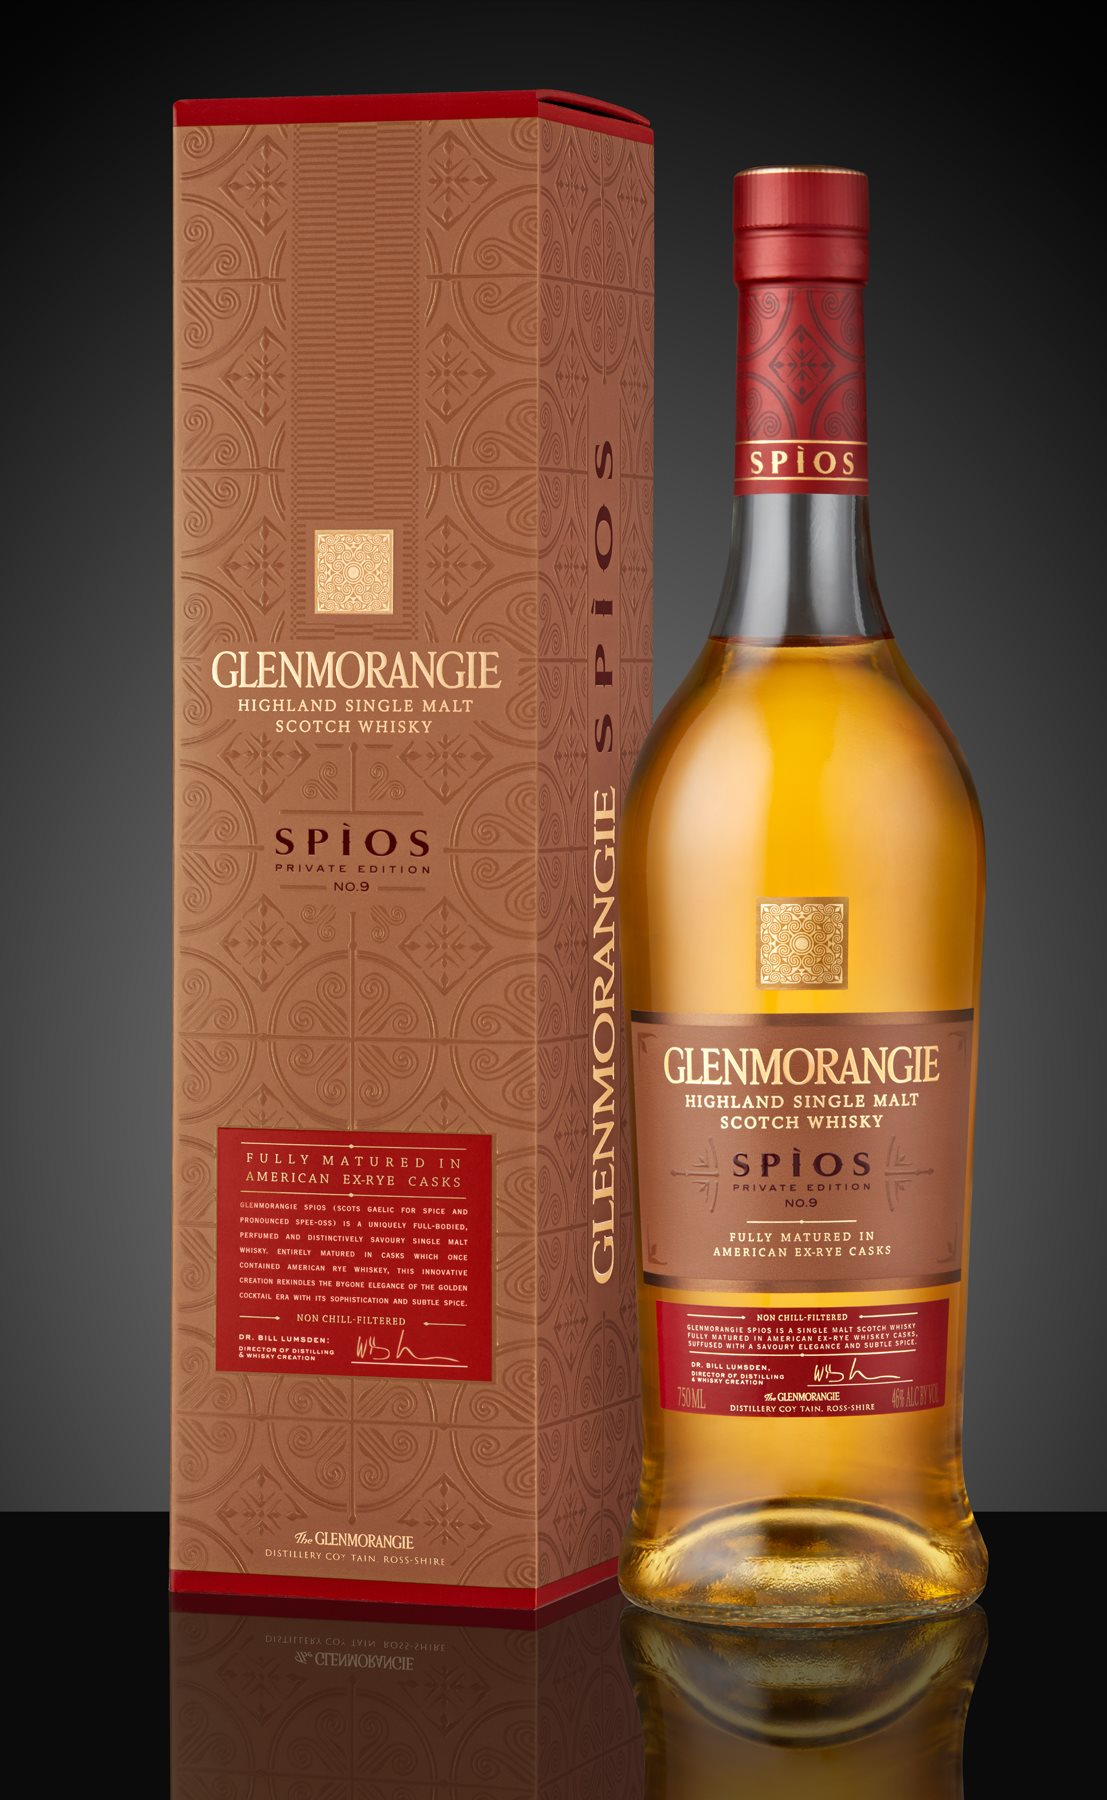 Glenmorangie Private Edition 9 Spios_Bottle and Pack on Black background